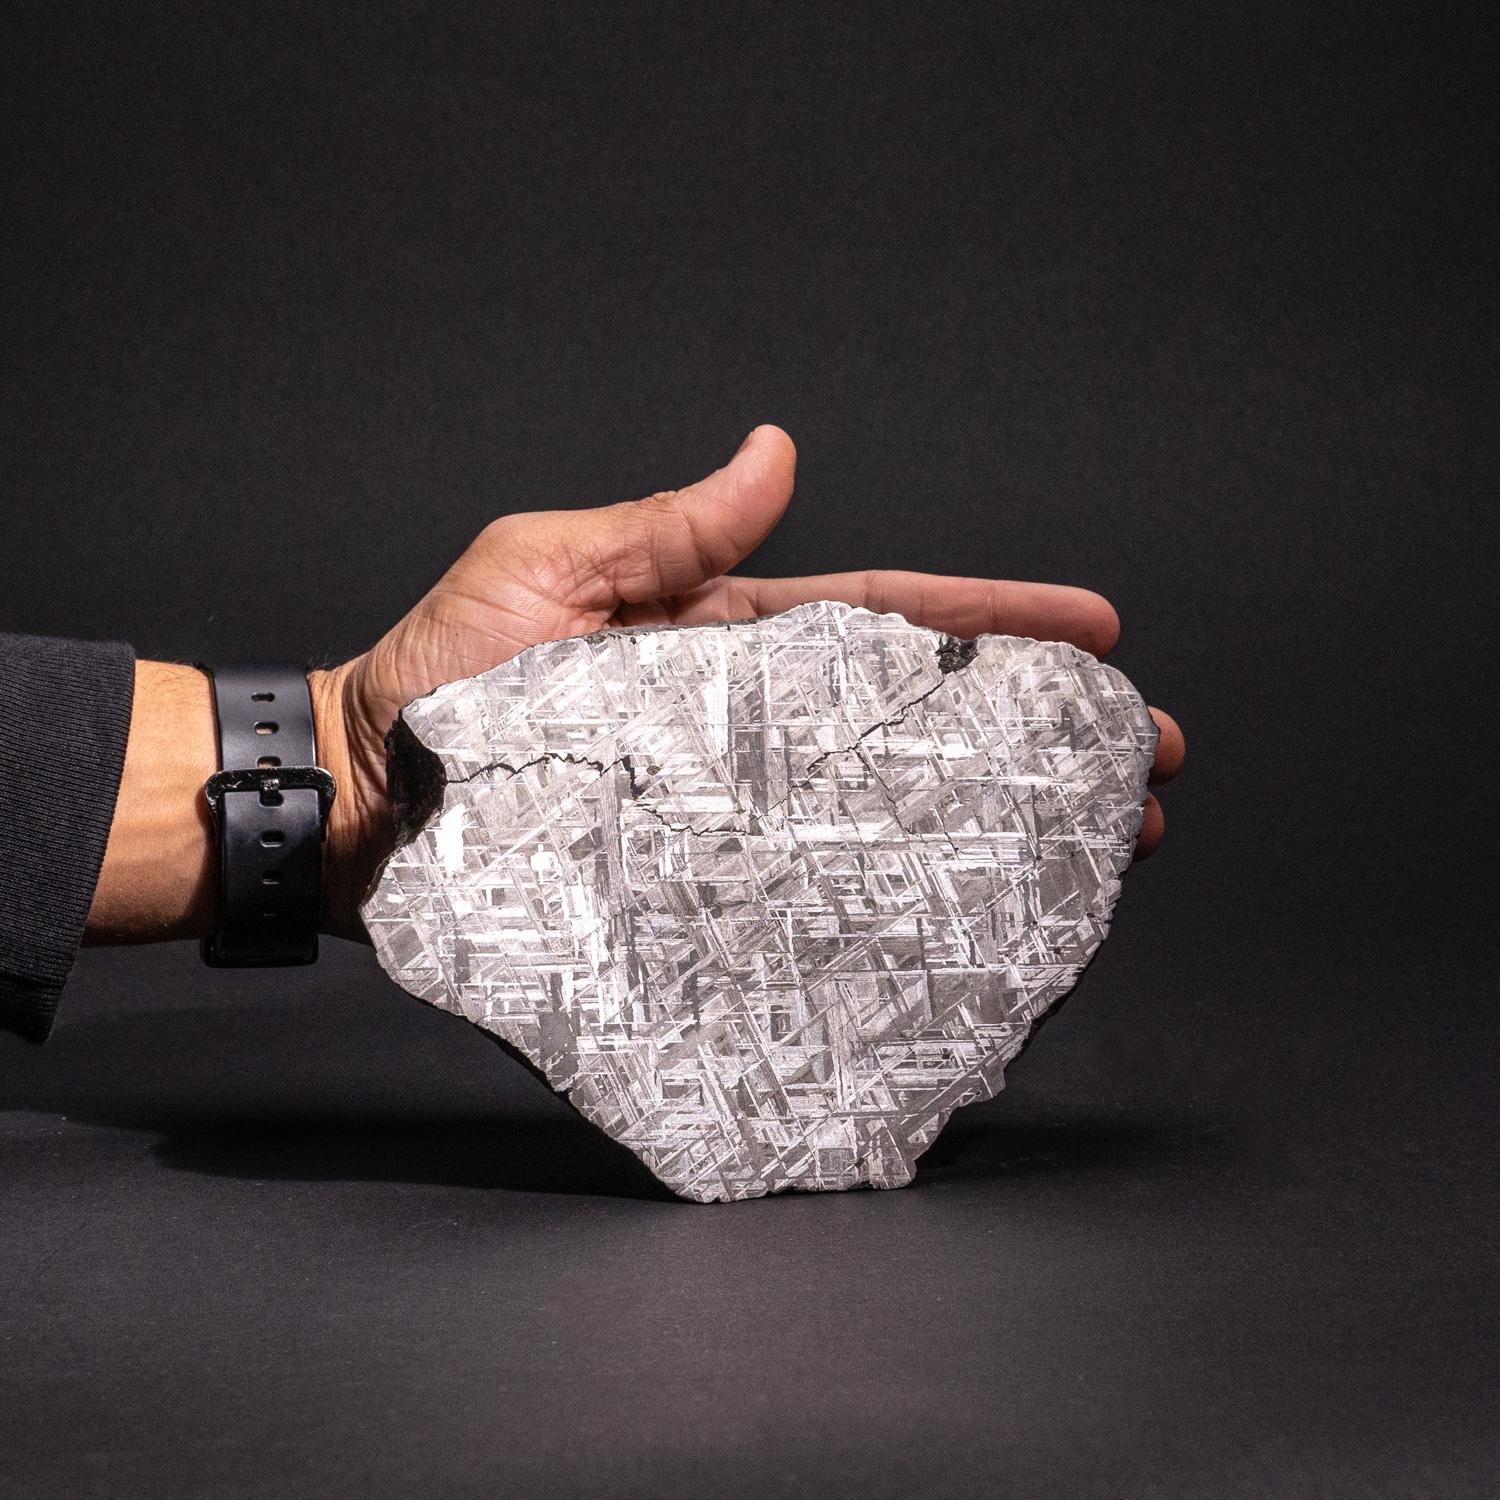 A stunning piece of natural history, this meteorite is a natural Muonionalusta Meteorite with one side sliced & polished which boasts its beautiful, metallic Widmanstätten pattern. The Muonionalusta is a meteorite classified as fine octahedrite,